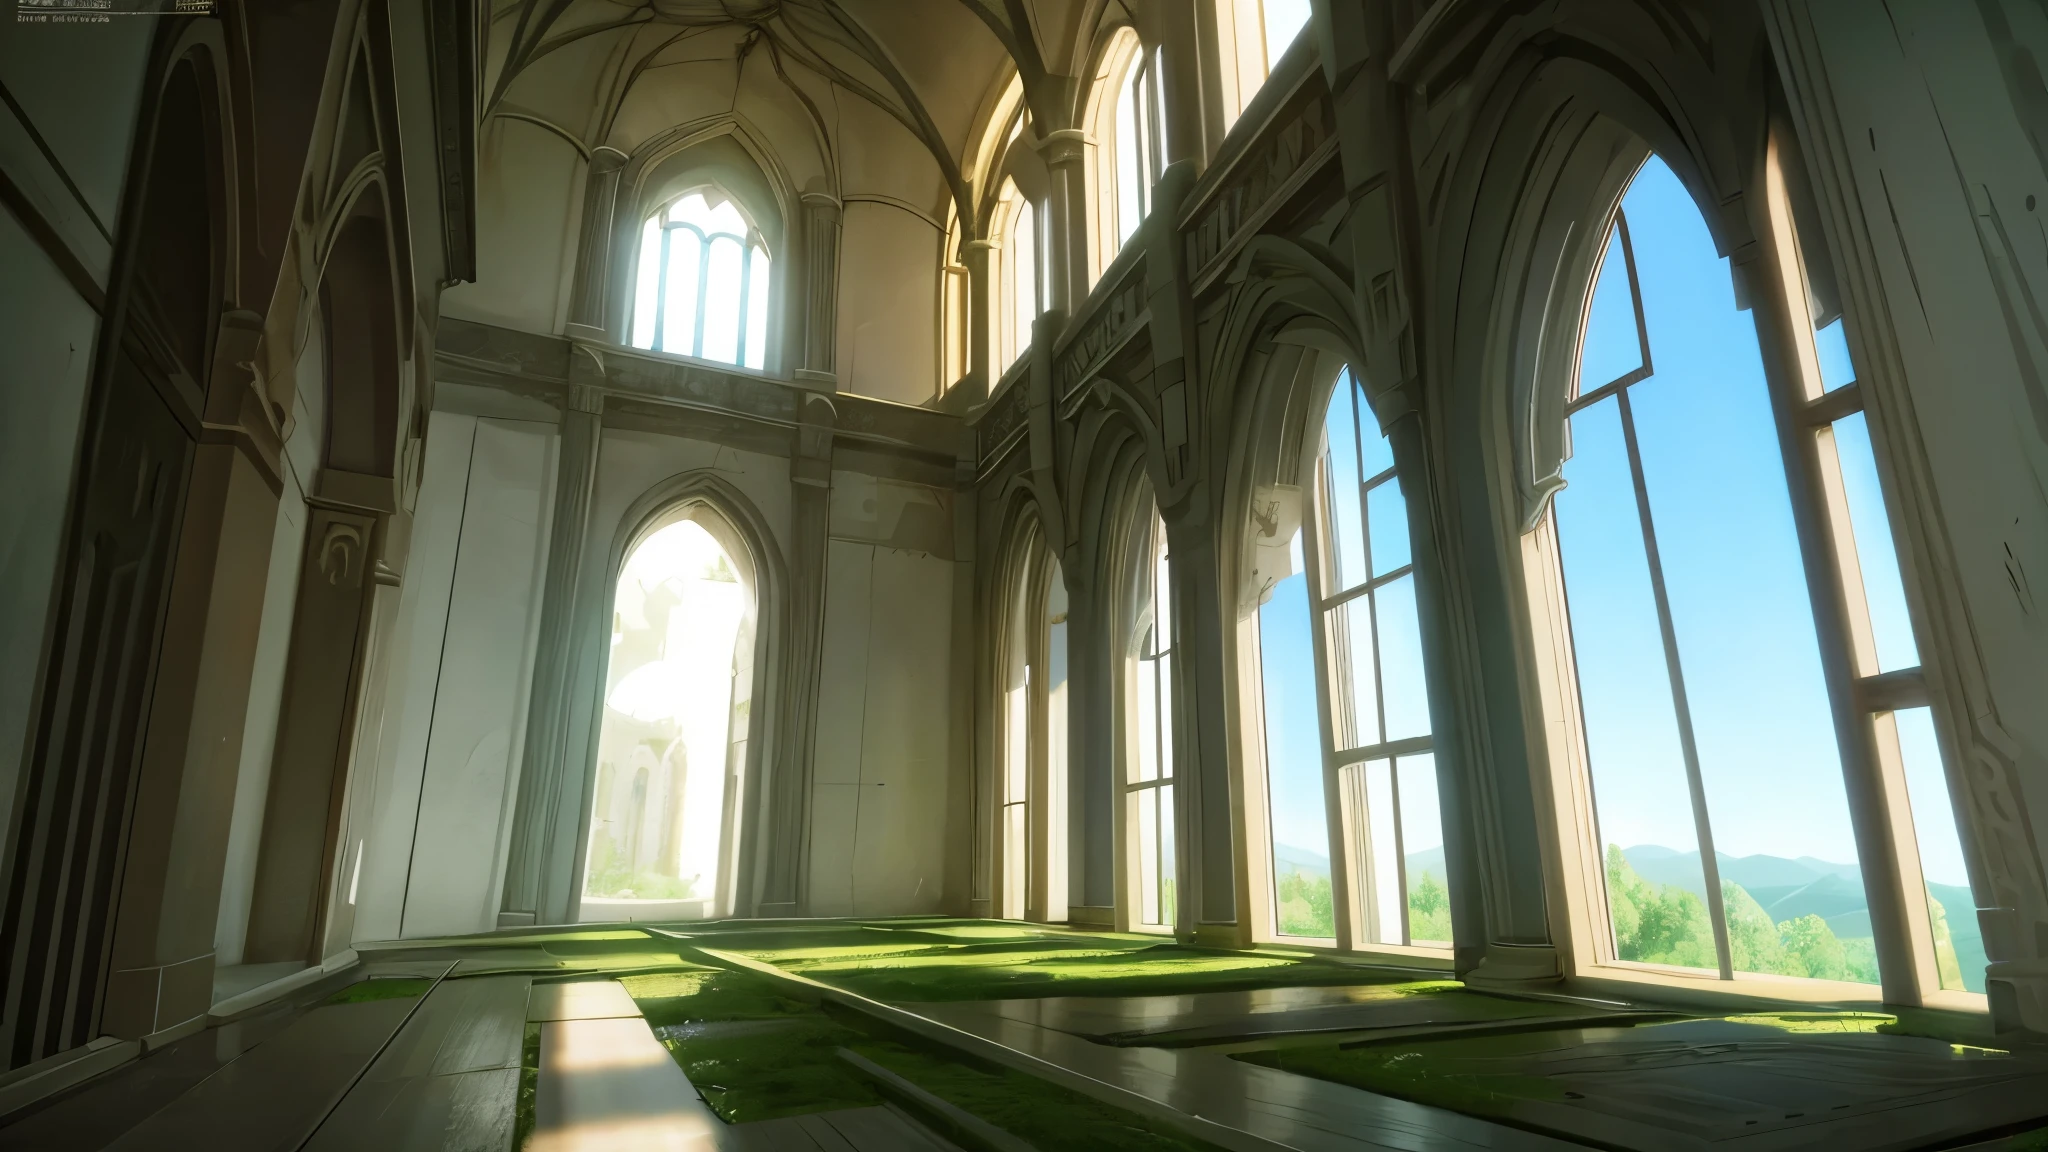 visual novel background, inside an ancient round tower, fantasy tower, high up, windows letting in sun showing the forest outside far below, extremely detailed